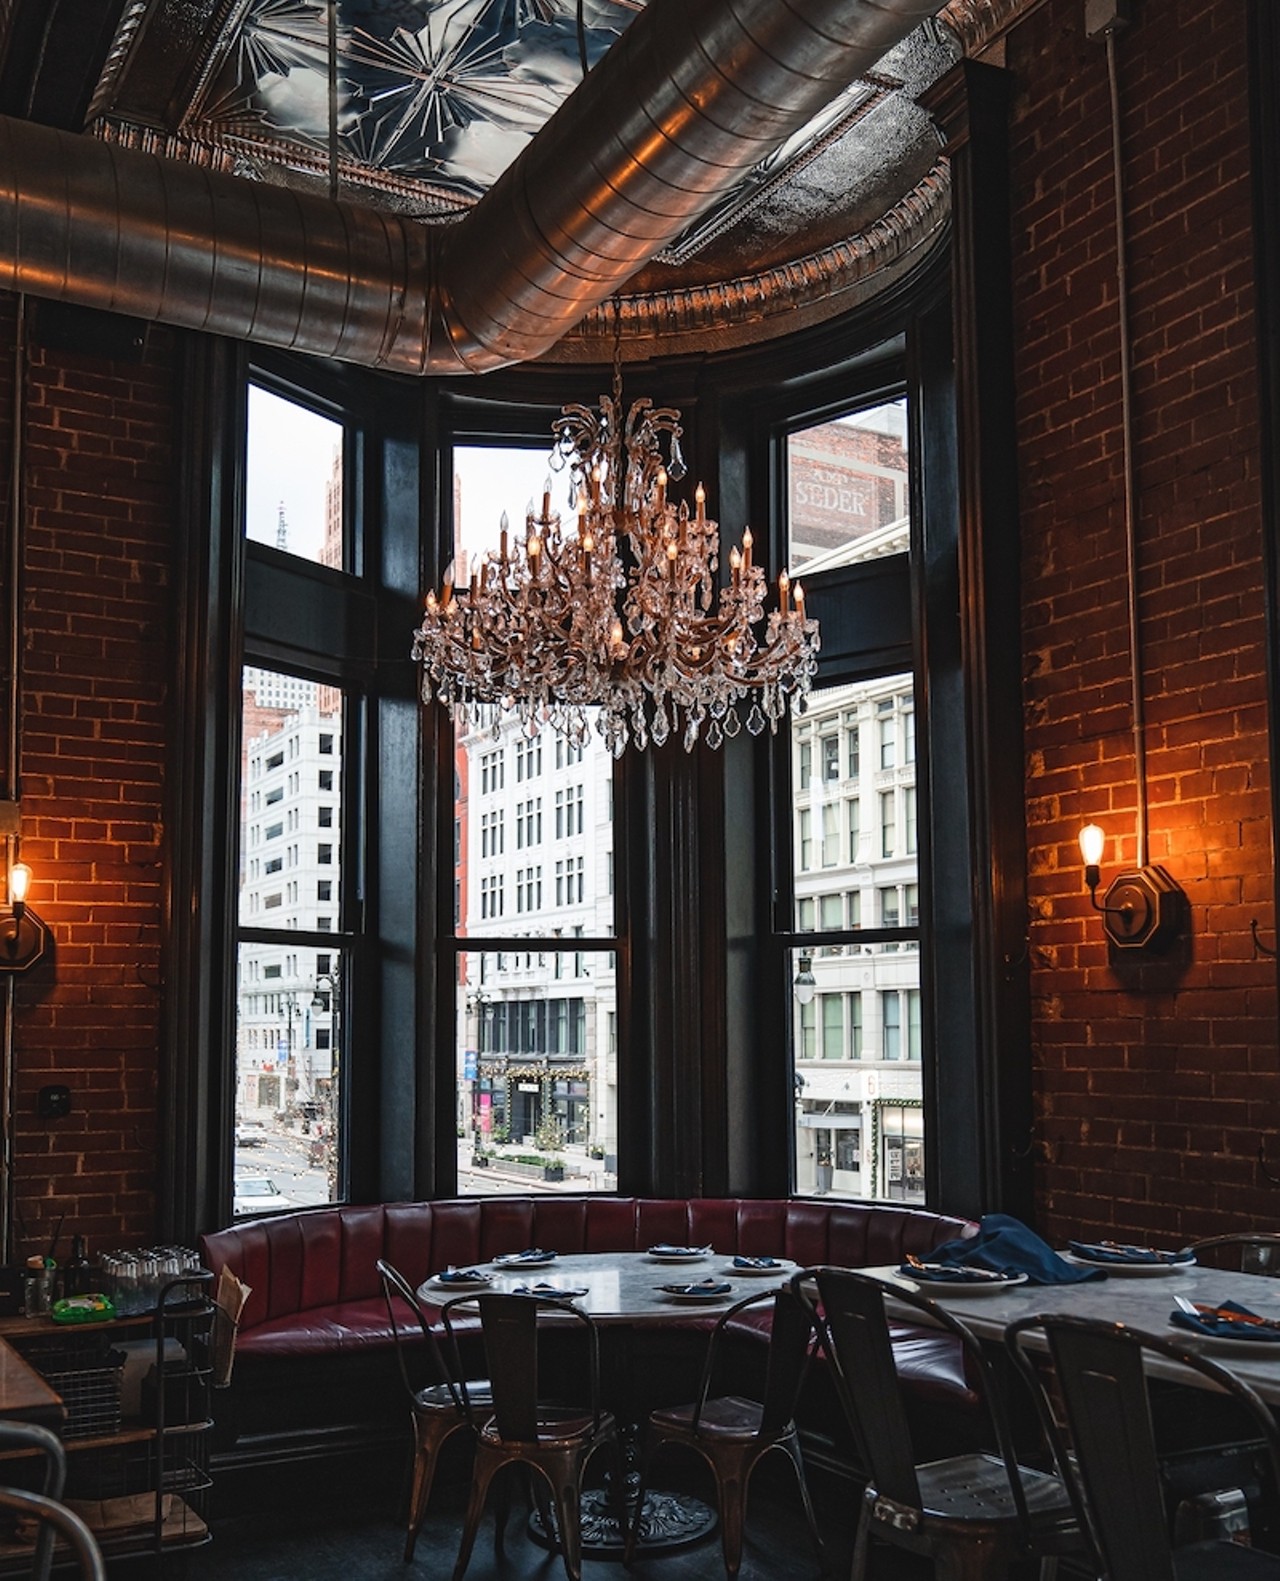 Wright & Co.
1500 Woodward Ave., Floor 2, Detroit; 313-962-7711; wrightdetroit.com
While you’re enjoying Wright & Co.’s bustling city views of Woodward Avenue, you can also enjoy a delicious meal from a menu curated by James Beard-nominated chef Marc Djozlija.